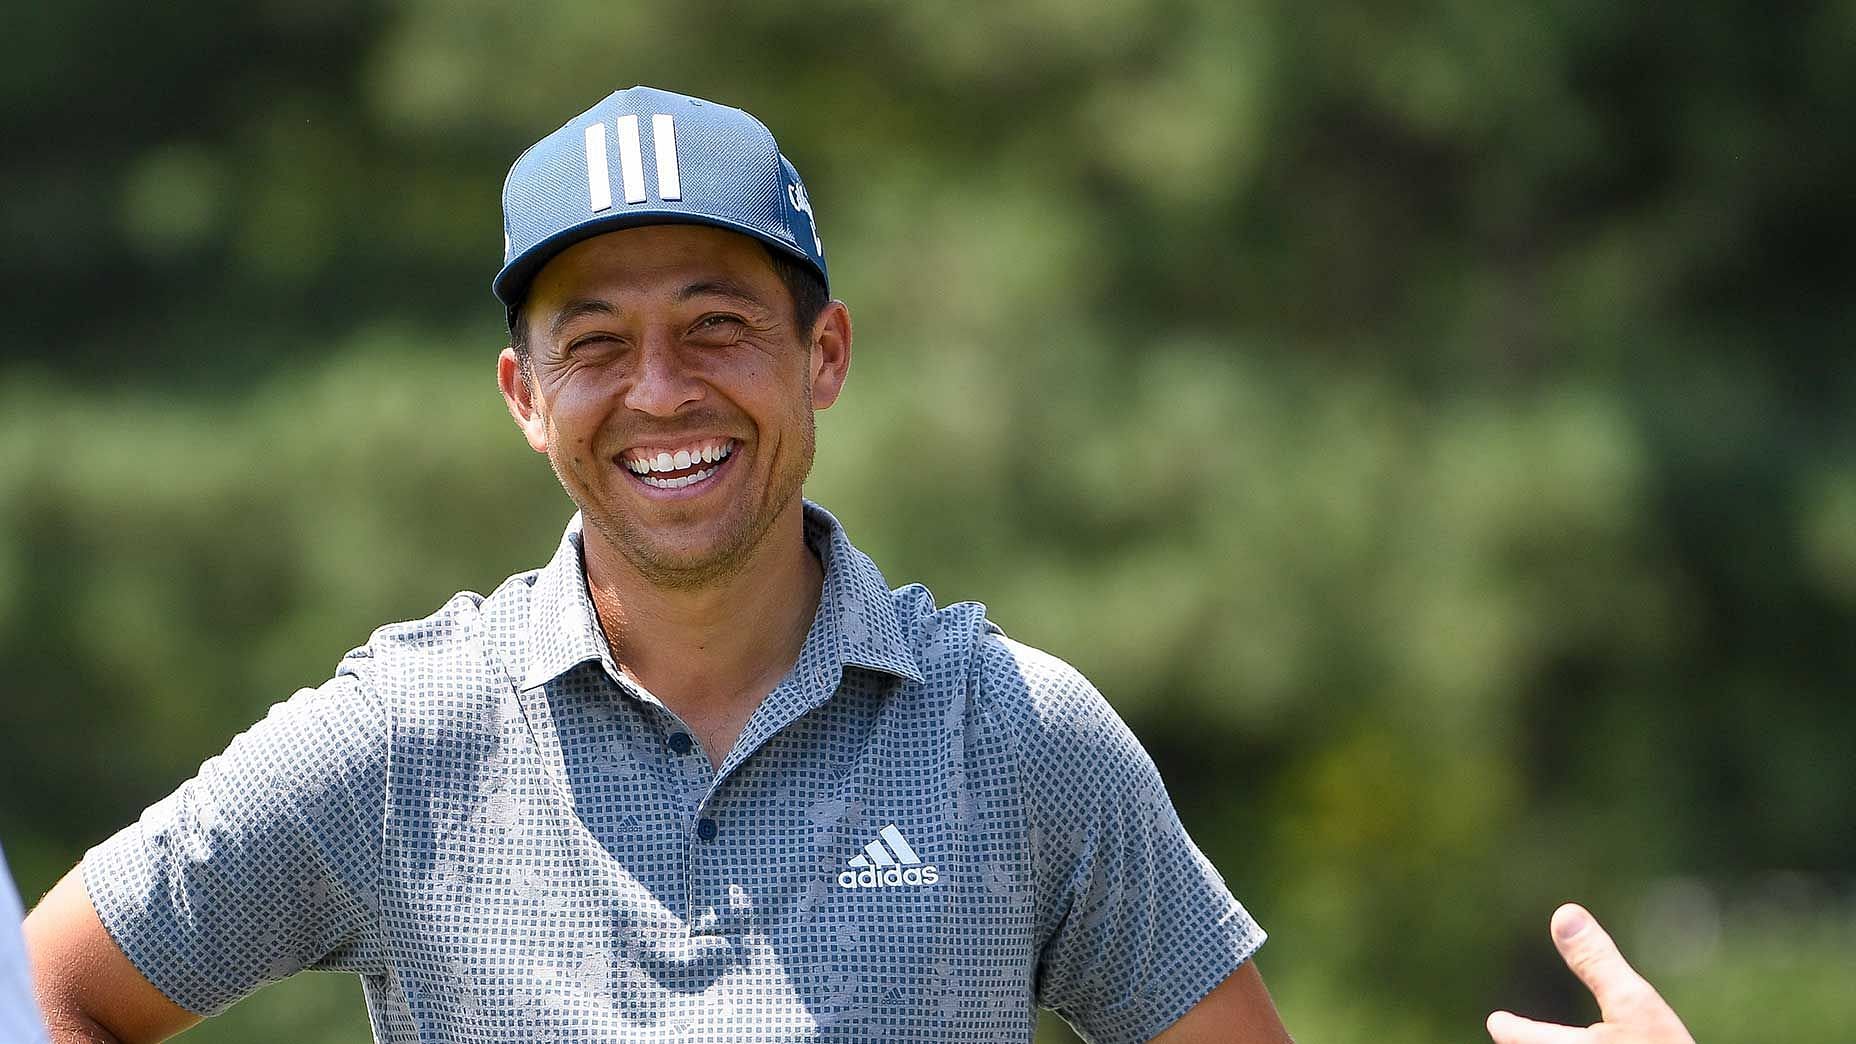 Is Xander Schauffele the latest PGA Tour player to join LIV Golf?